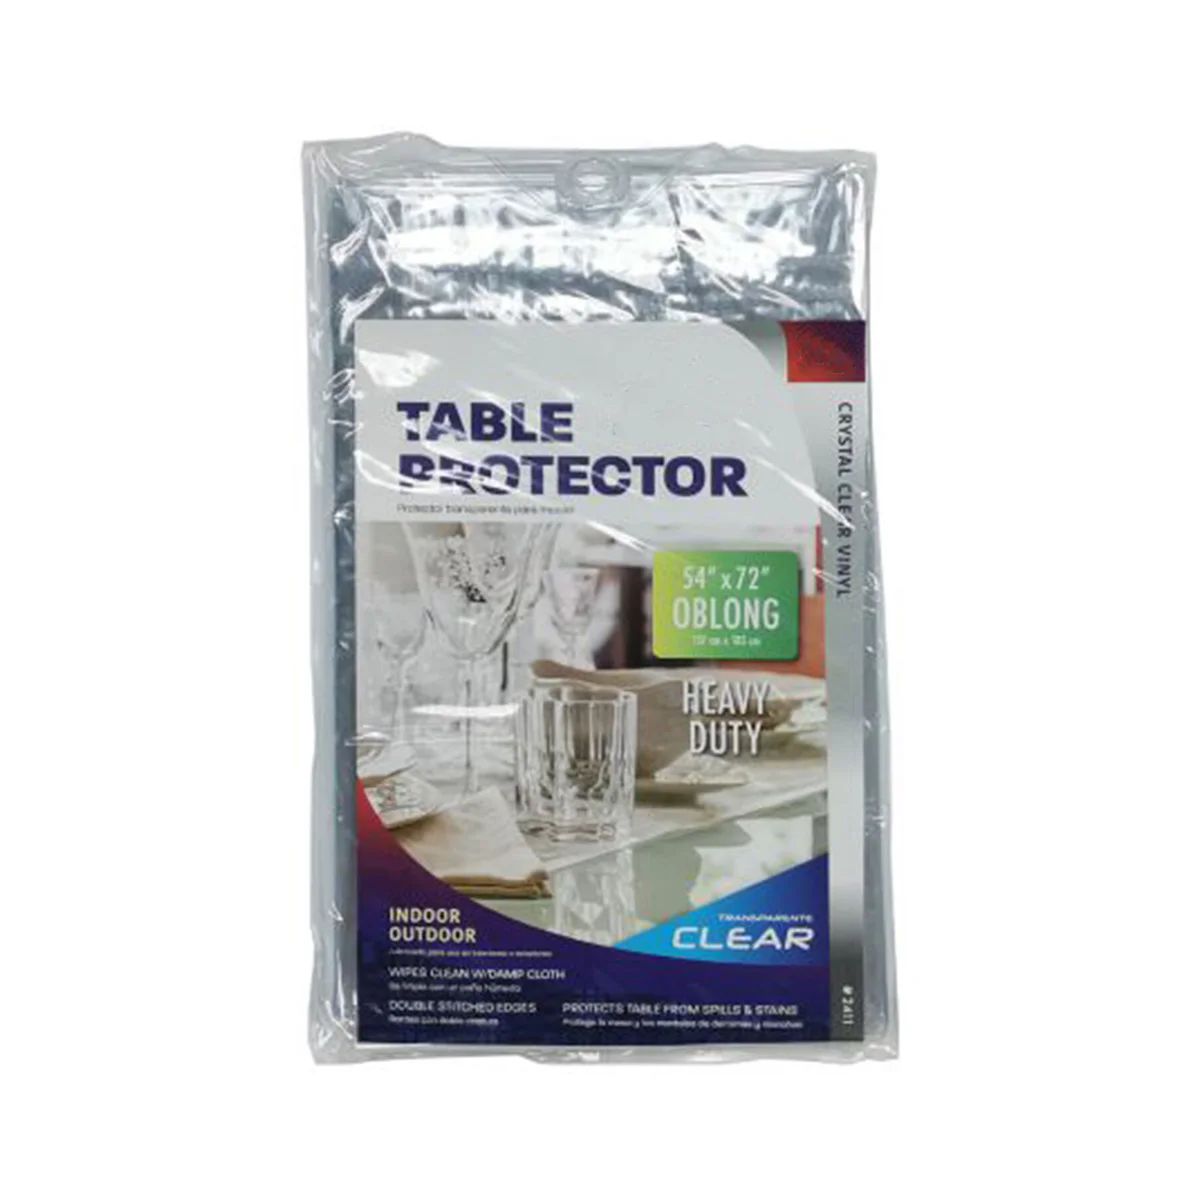 24 Pieces of Oblong Clear Pcv Table Protector - 54" X 72"